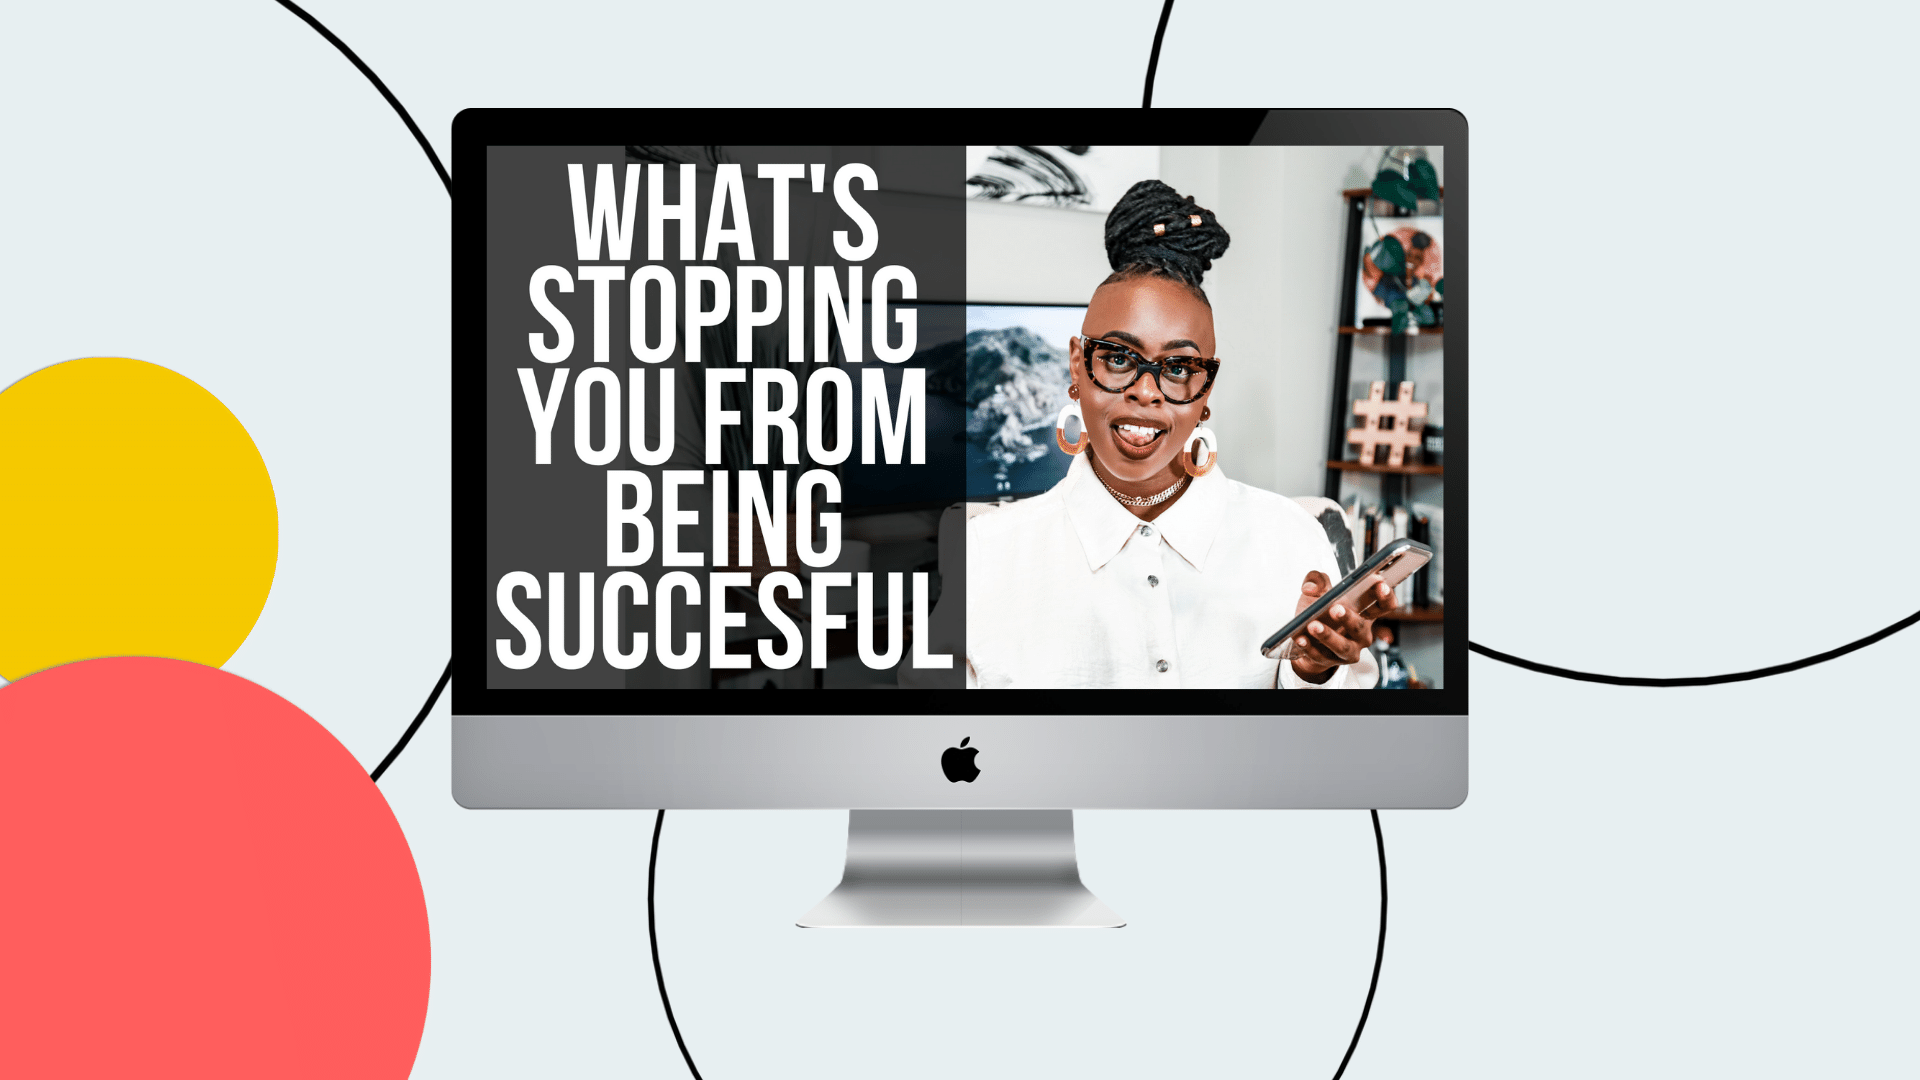 What's stopping you from being successful